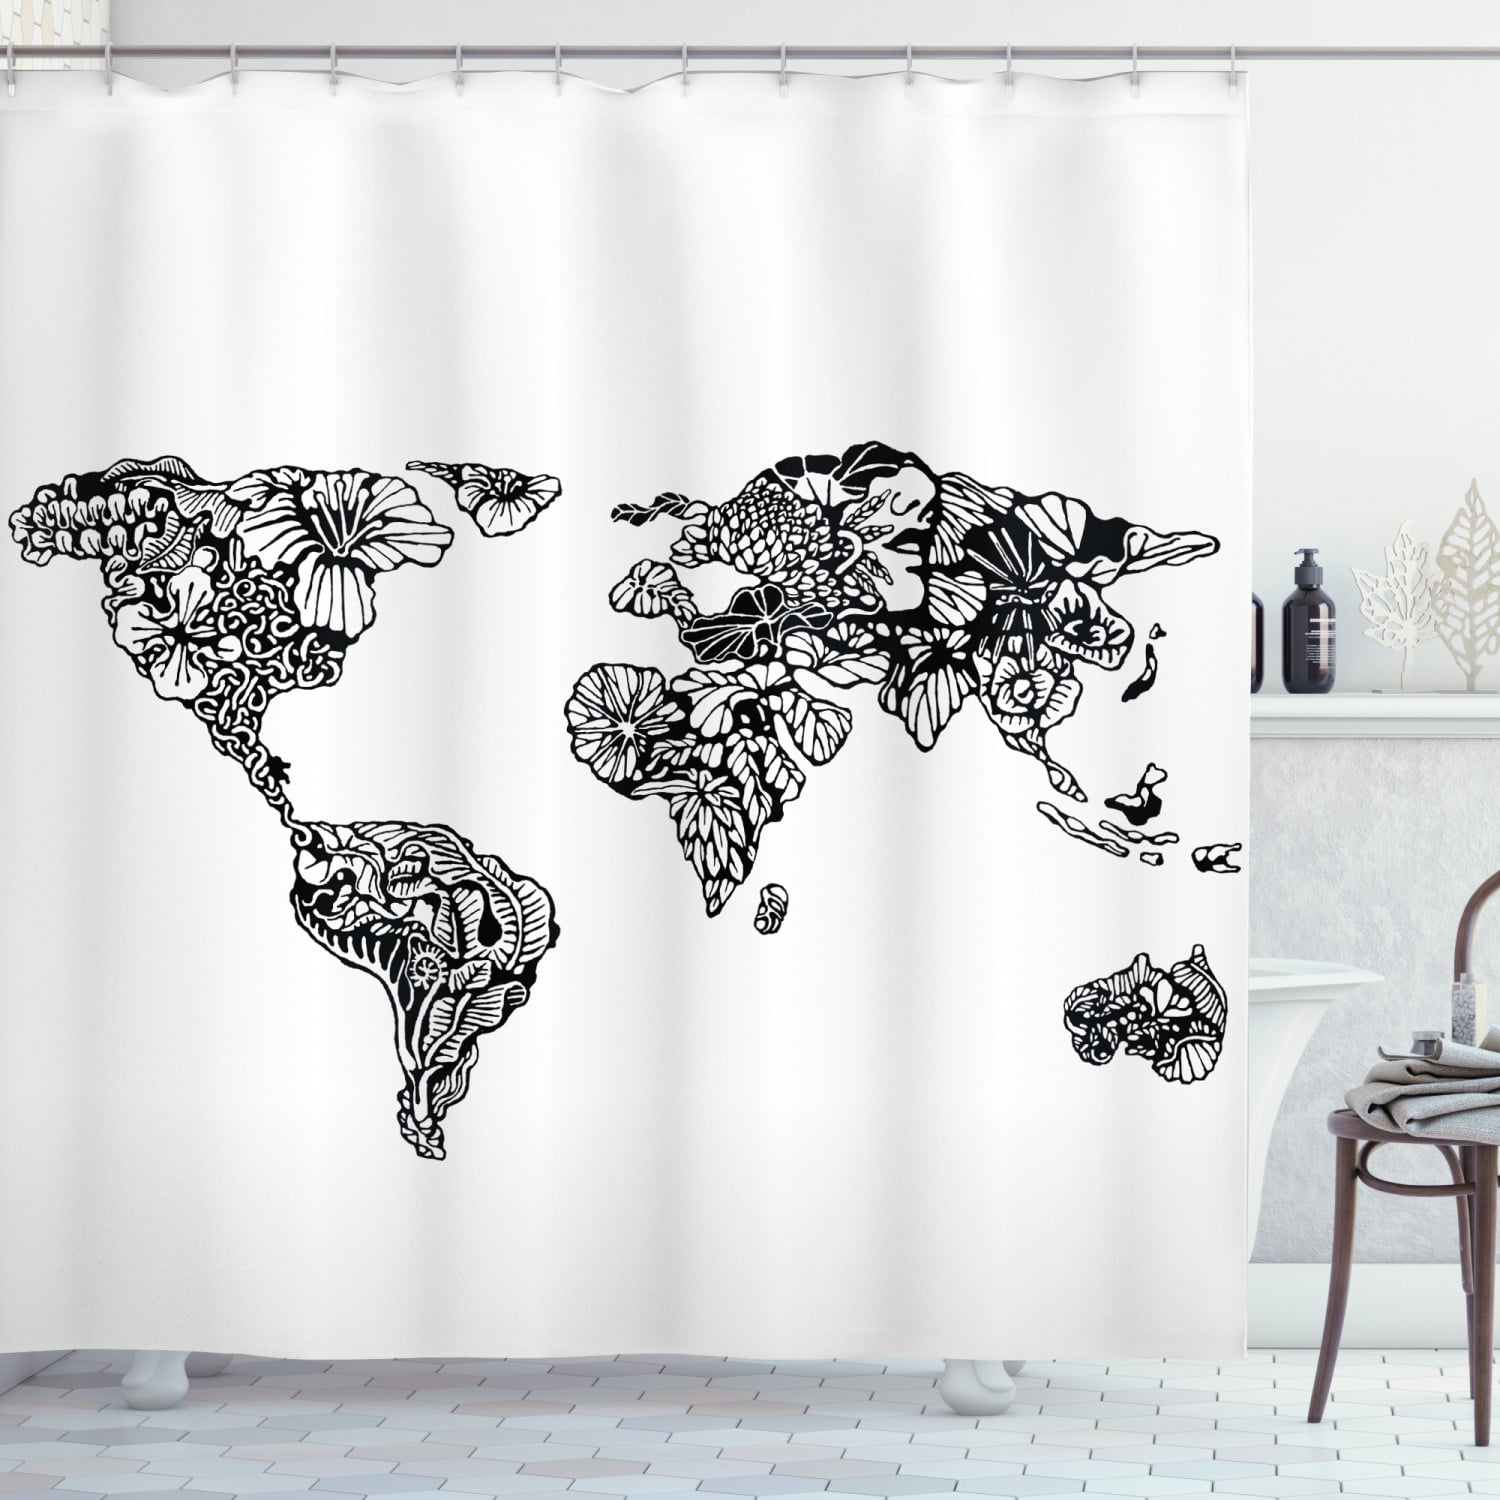 Modern Shower Curtain Artistic Sketch, Black And White Map Shower Curtain